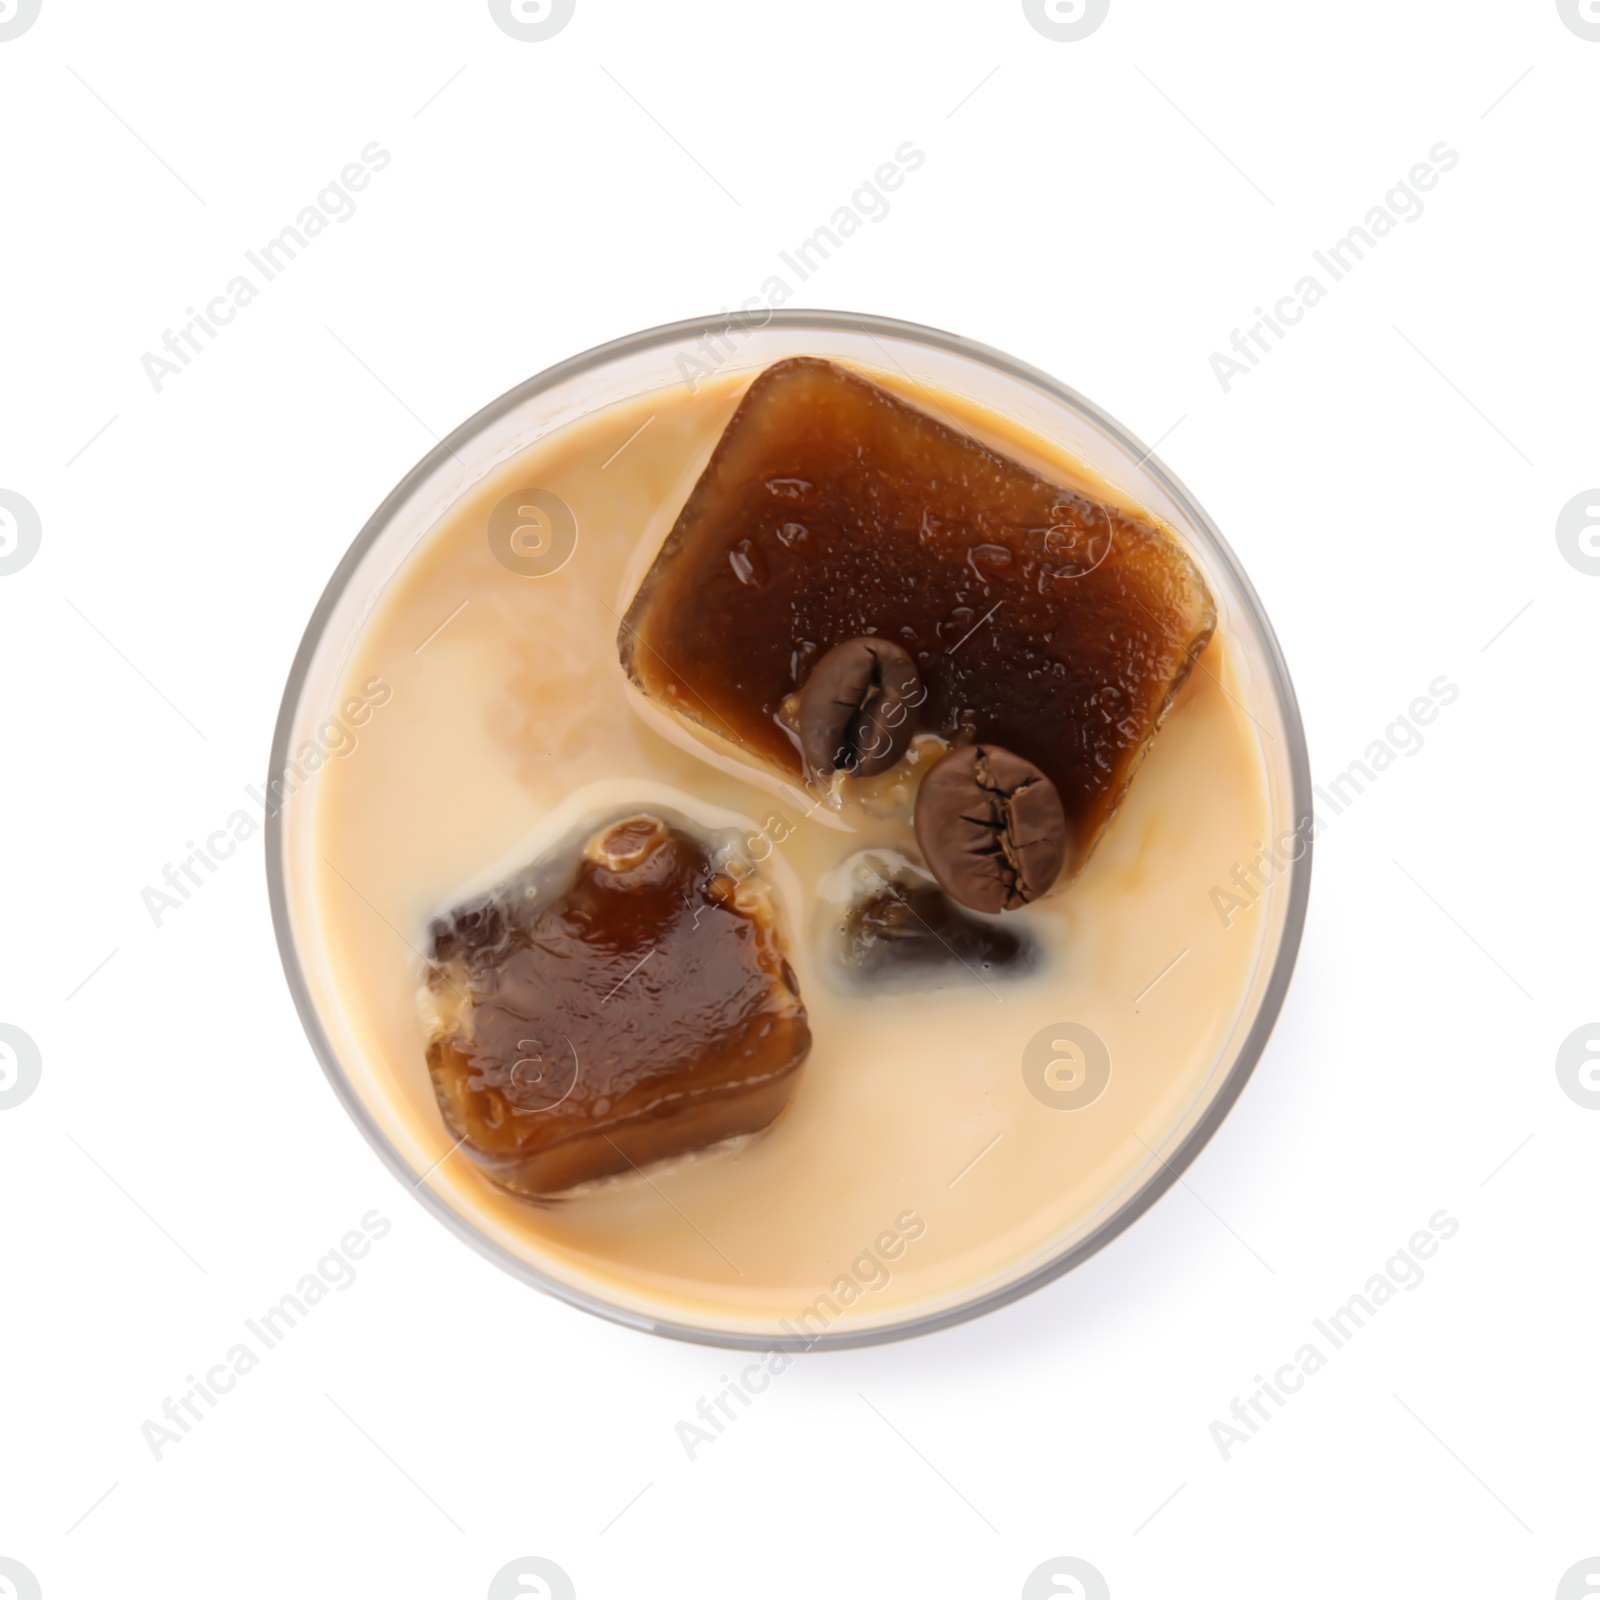 Photo of Glass of milk with coffee ice cubes on white background, top view